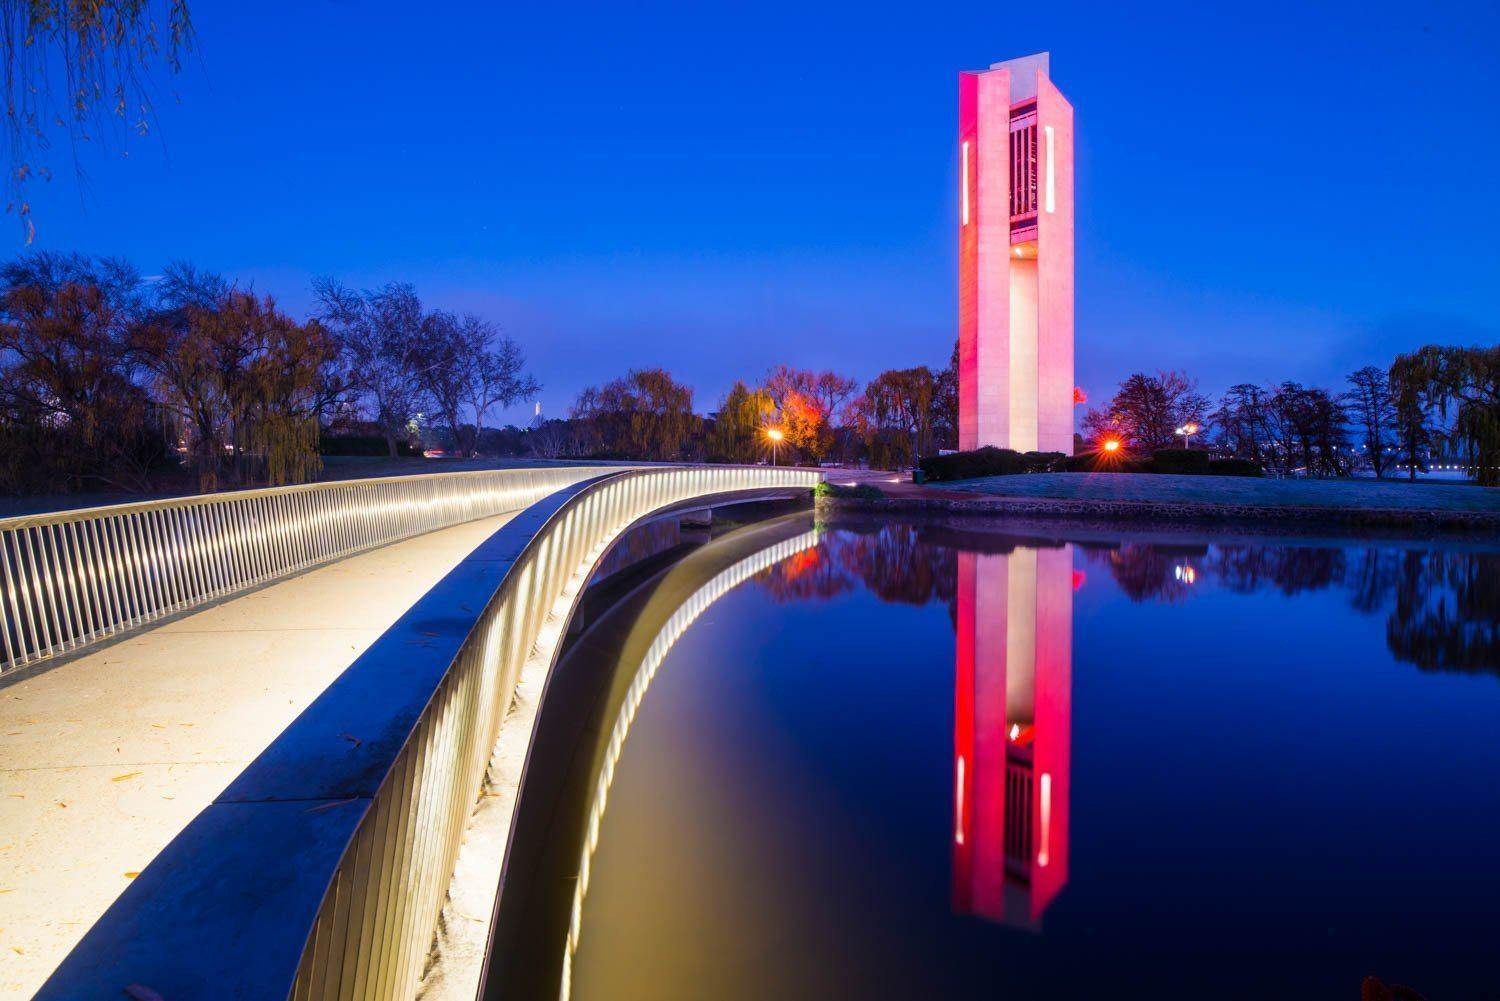 A beautiful pink-shaded white building on a lake corner, The Night Carillon - Lake Burley Griffin AC